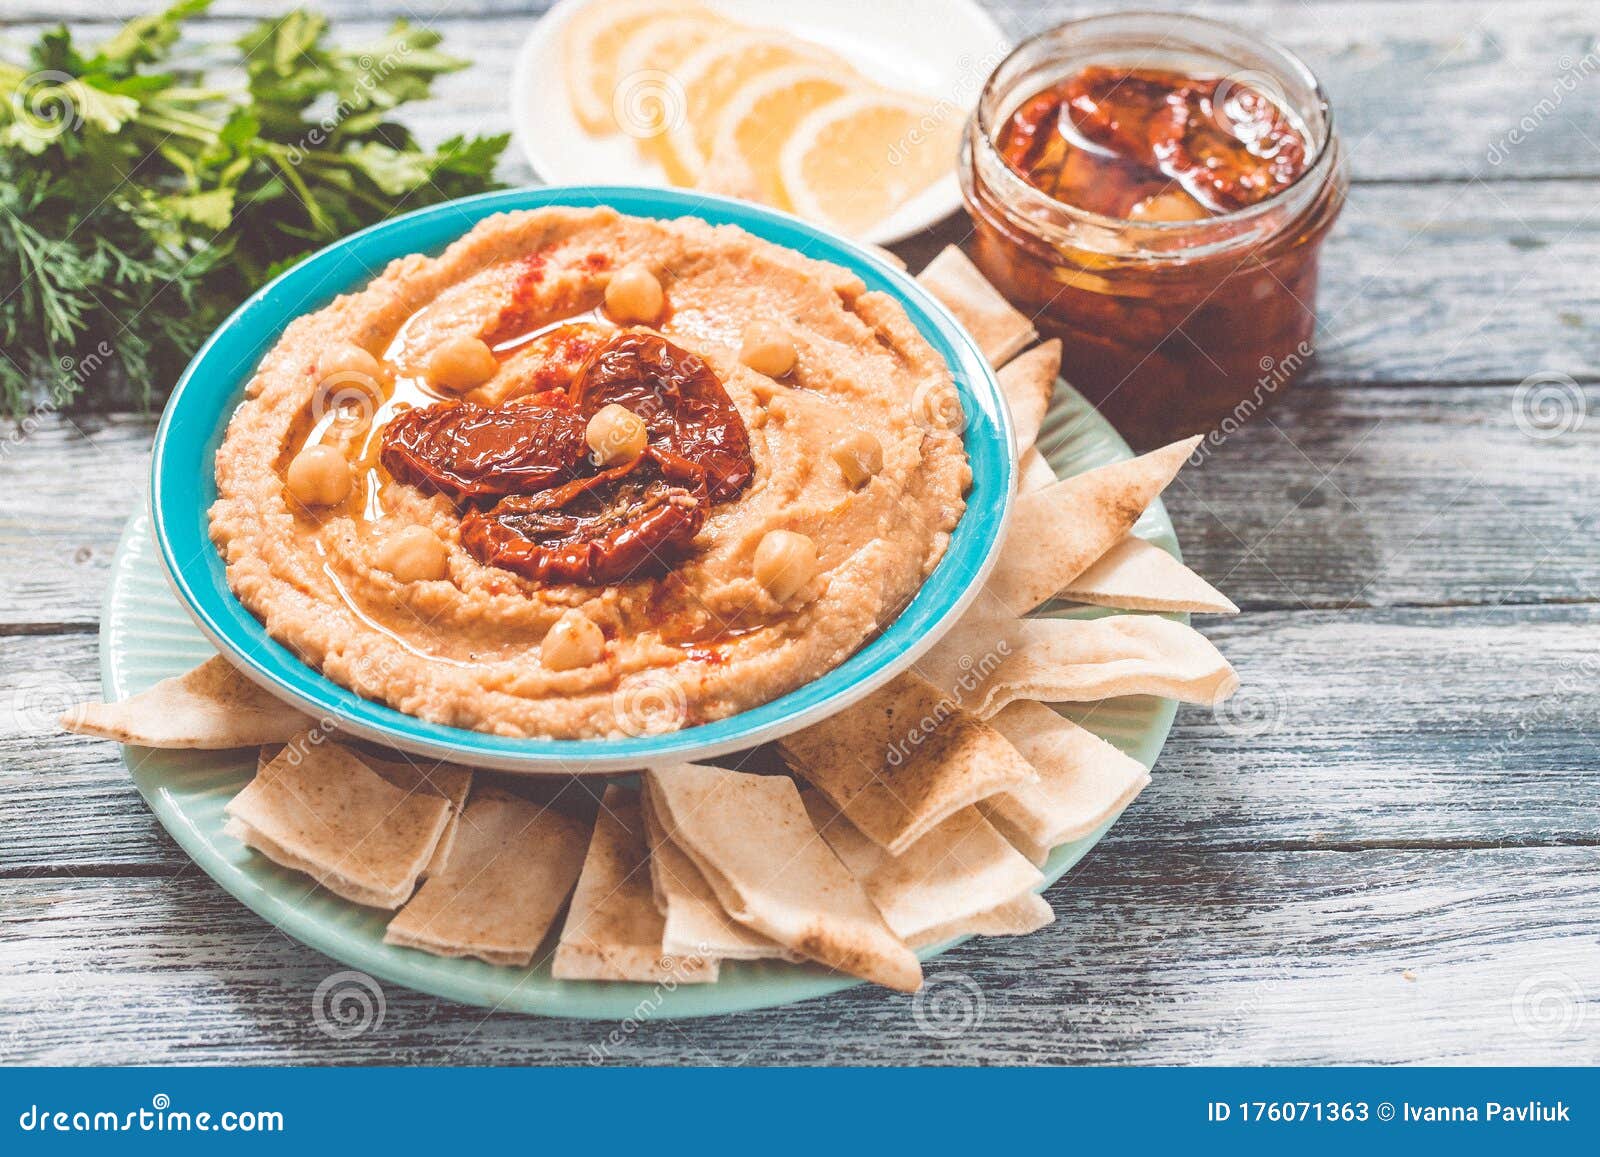 a bowl of creamy homemade hummus with with sun-dried tomatoes, olive oil and pita chips. traditional vegan healthy meal